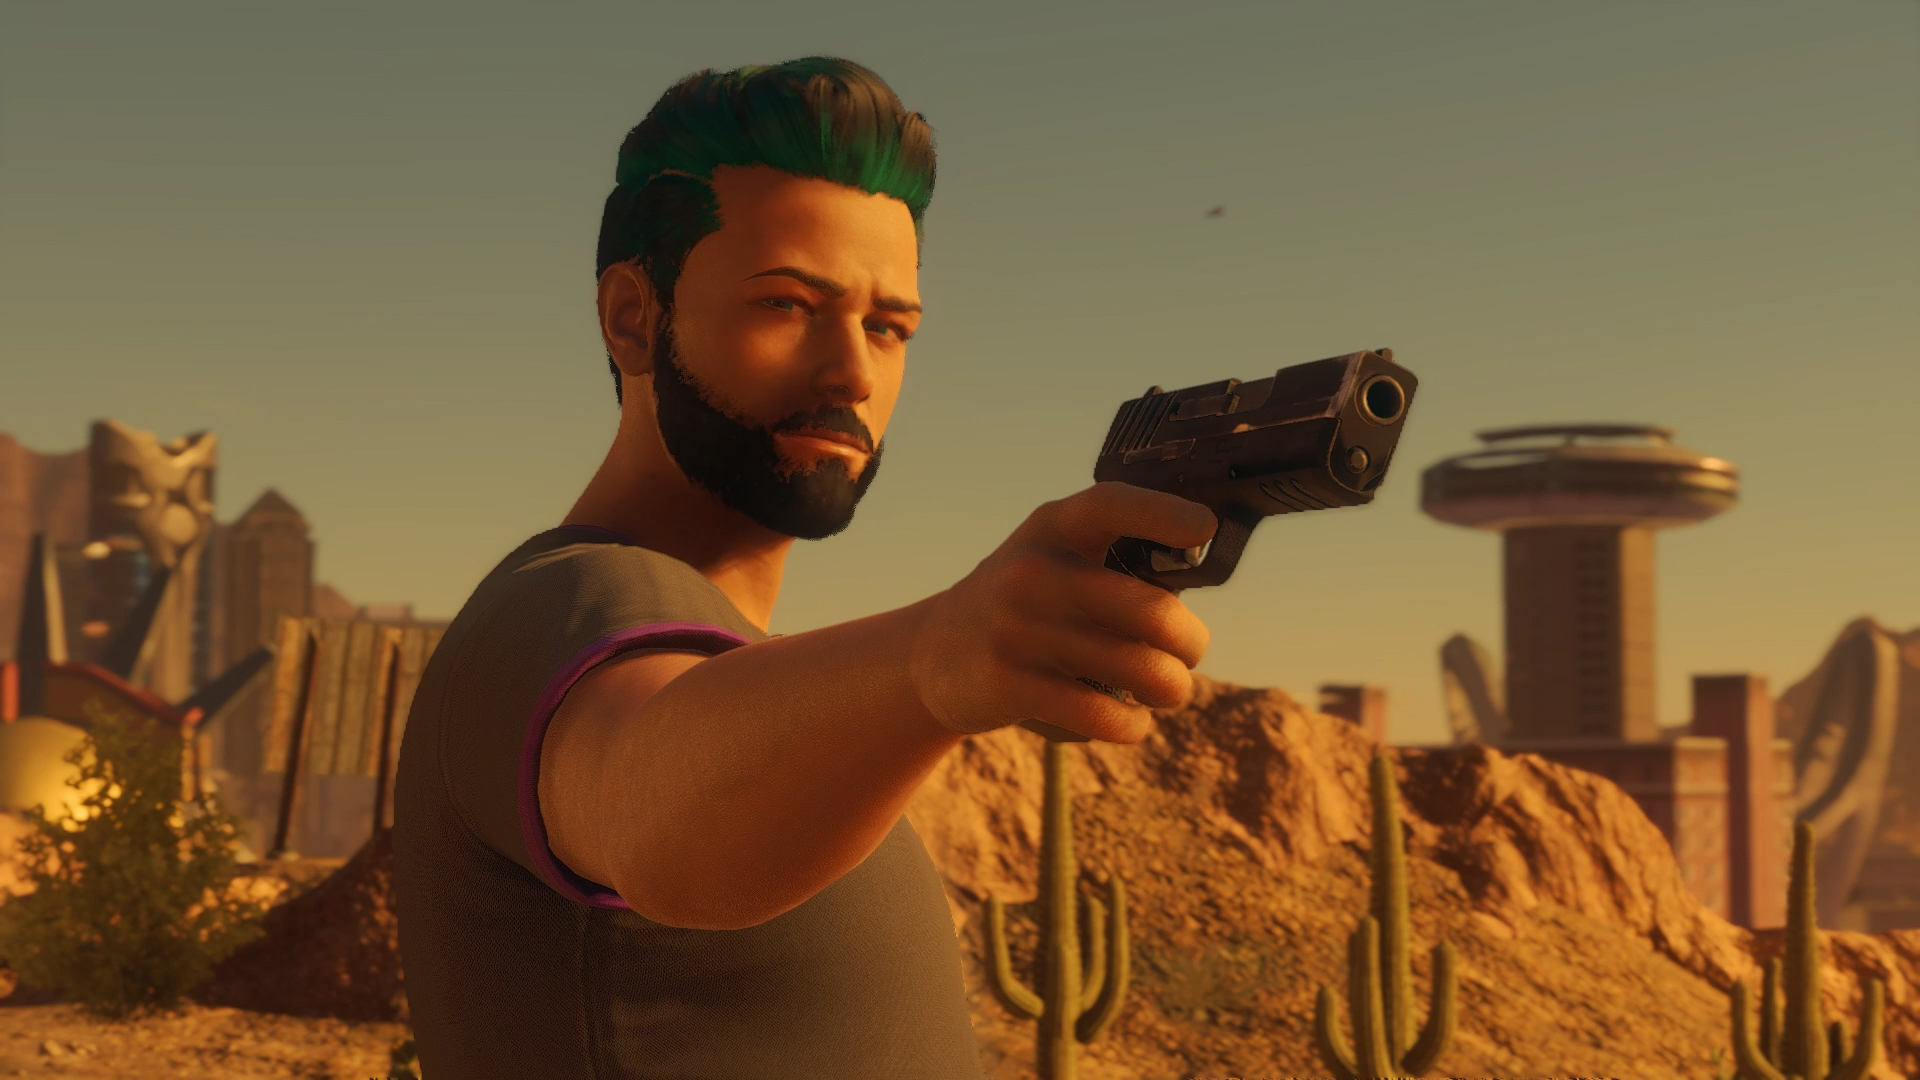 Saints Row Review "A Refresh, Mired By Technical Issues"